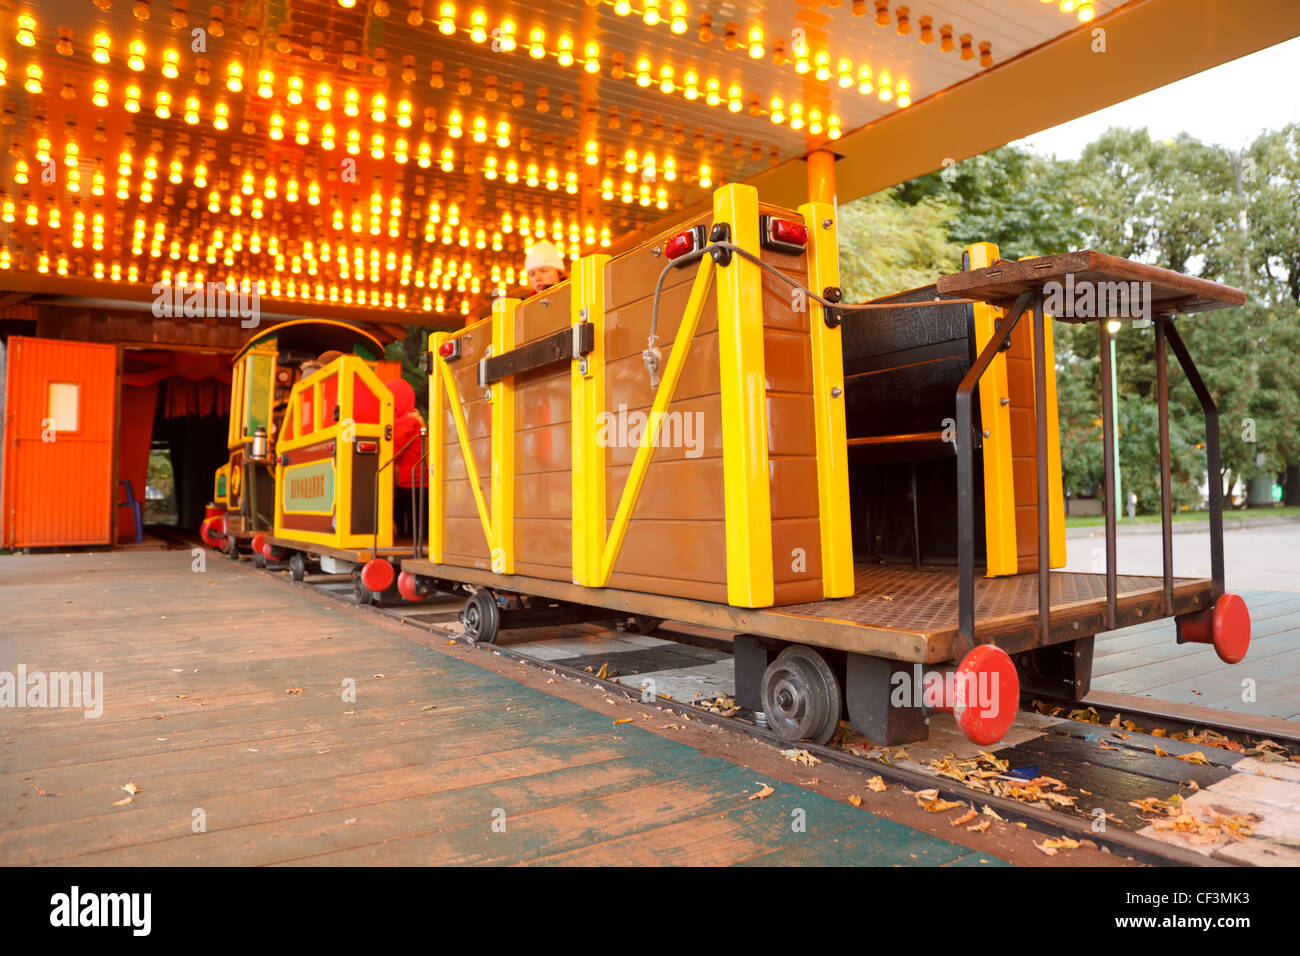 Attraction in park. Children's railway, train with bright cars. Stock Photo